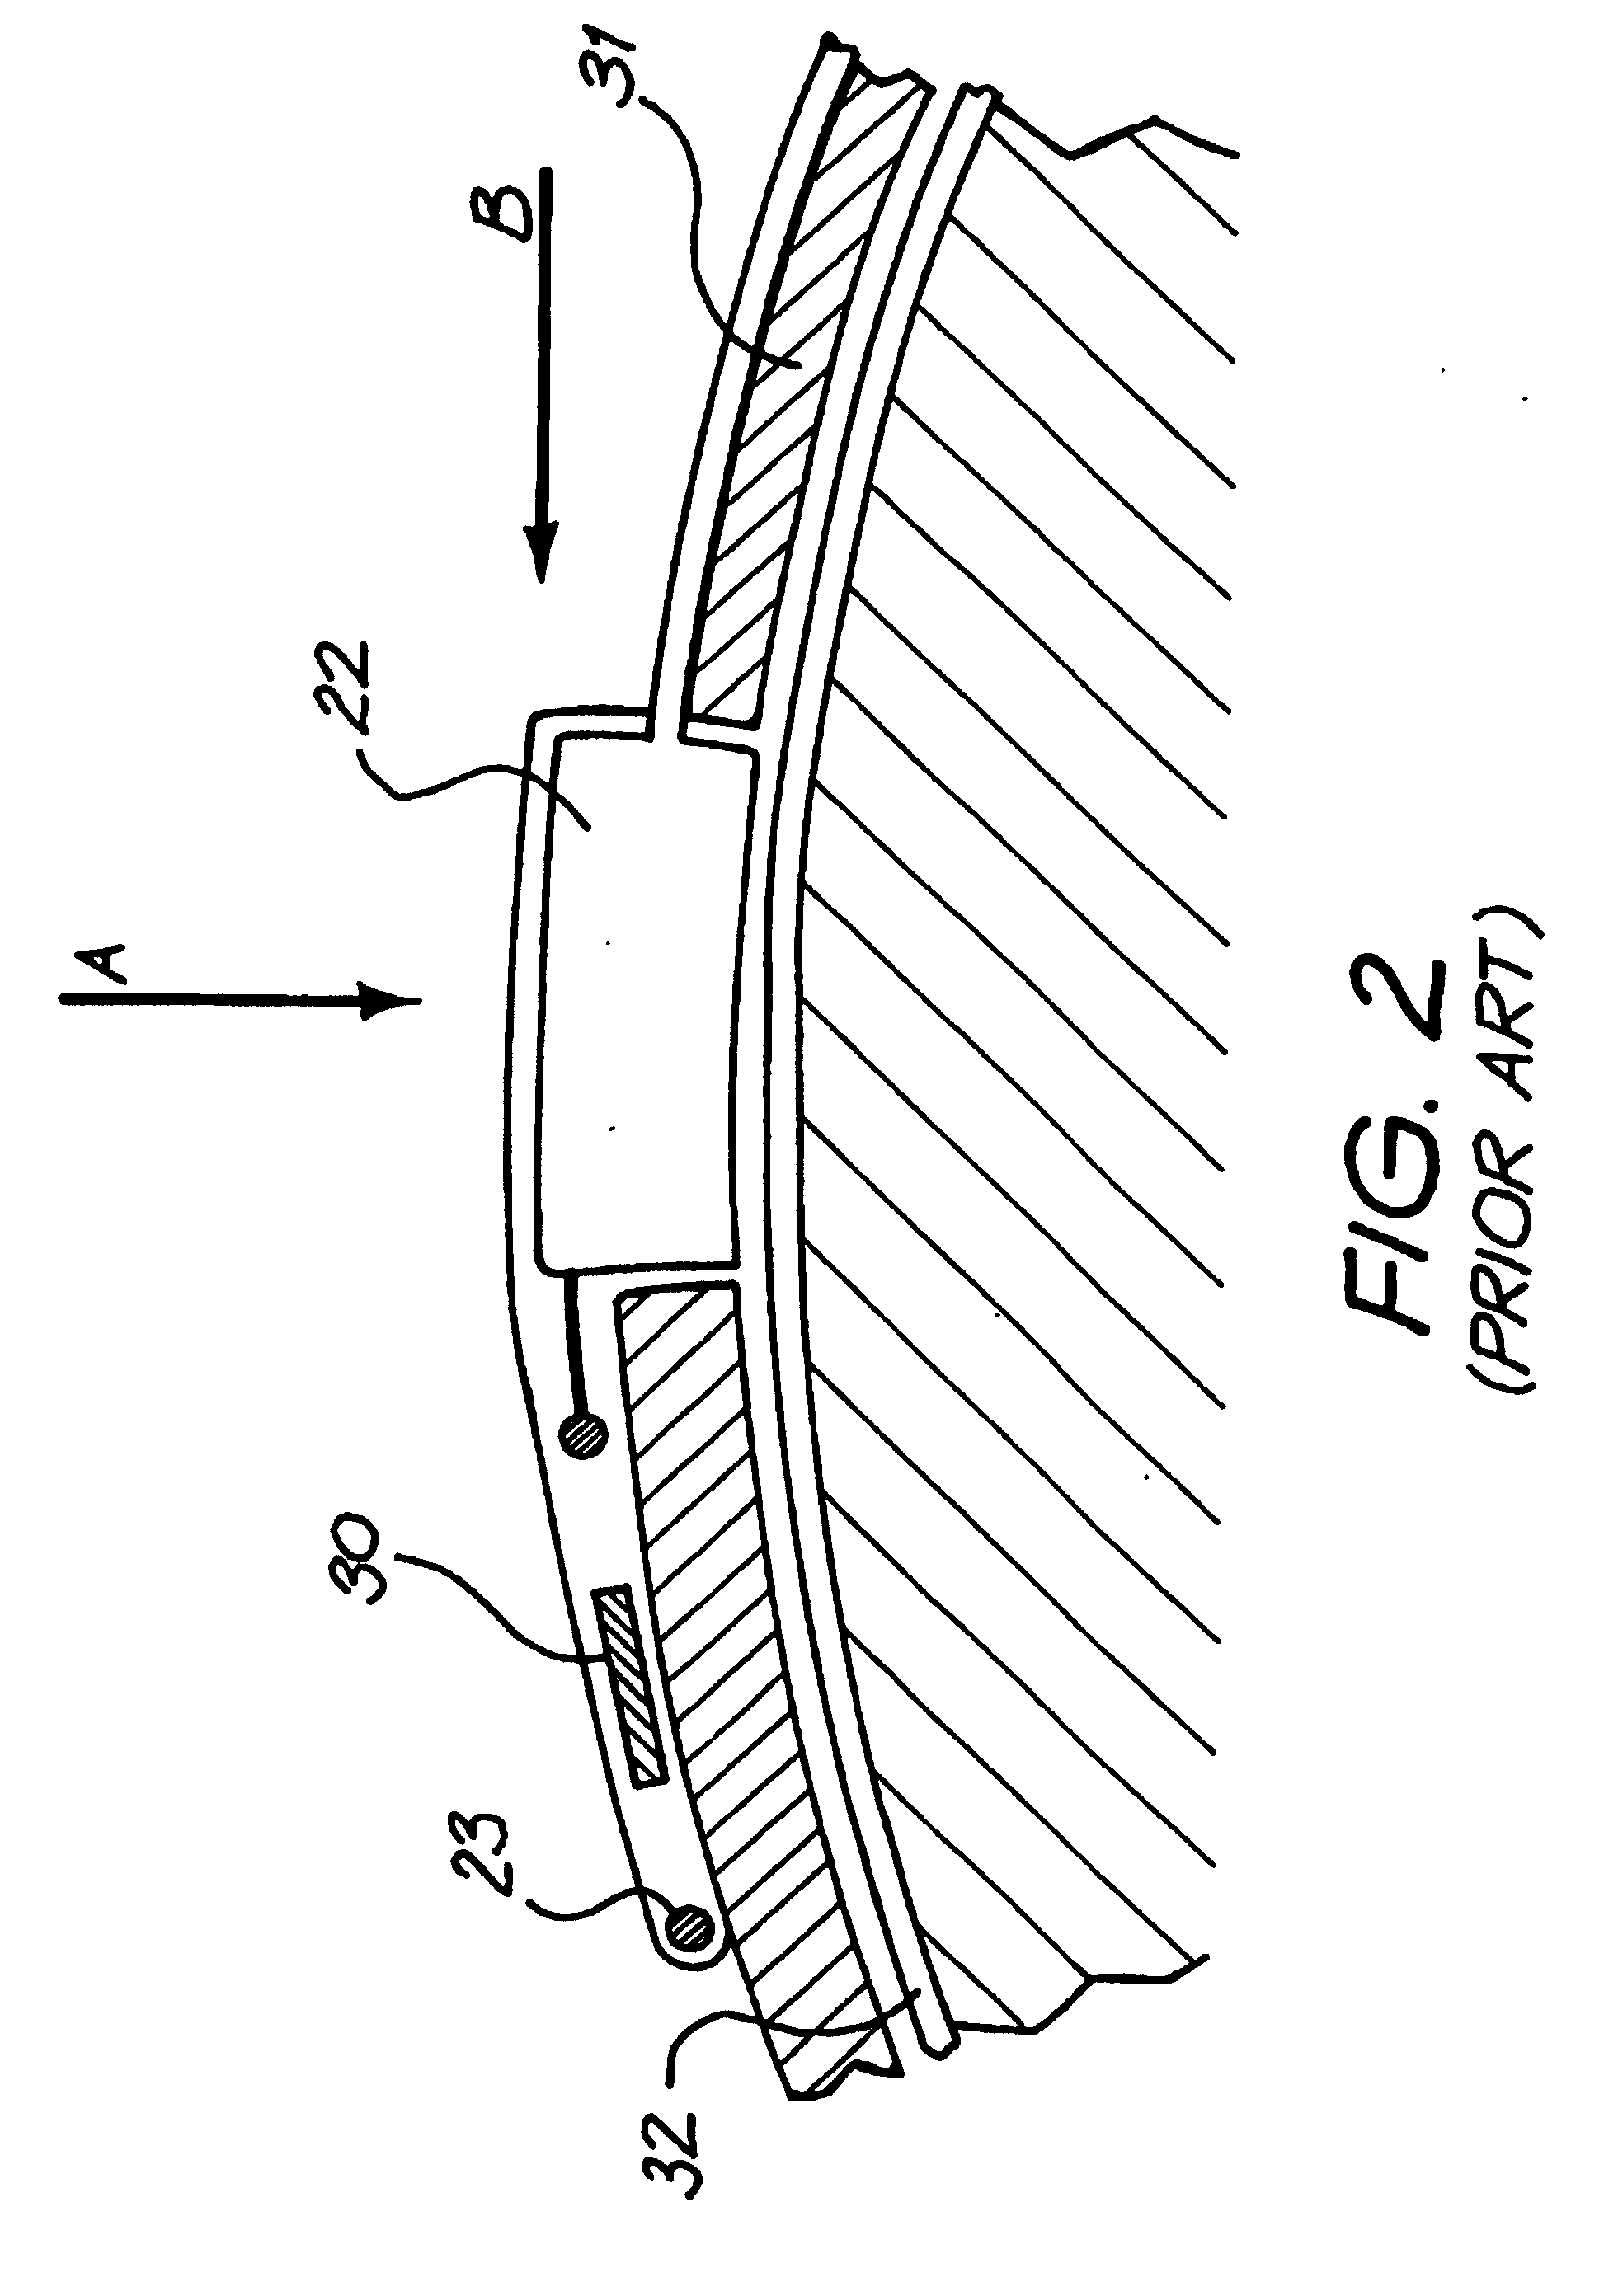 Fixation system for an implantable medical device